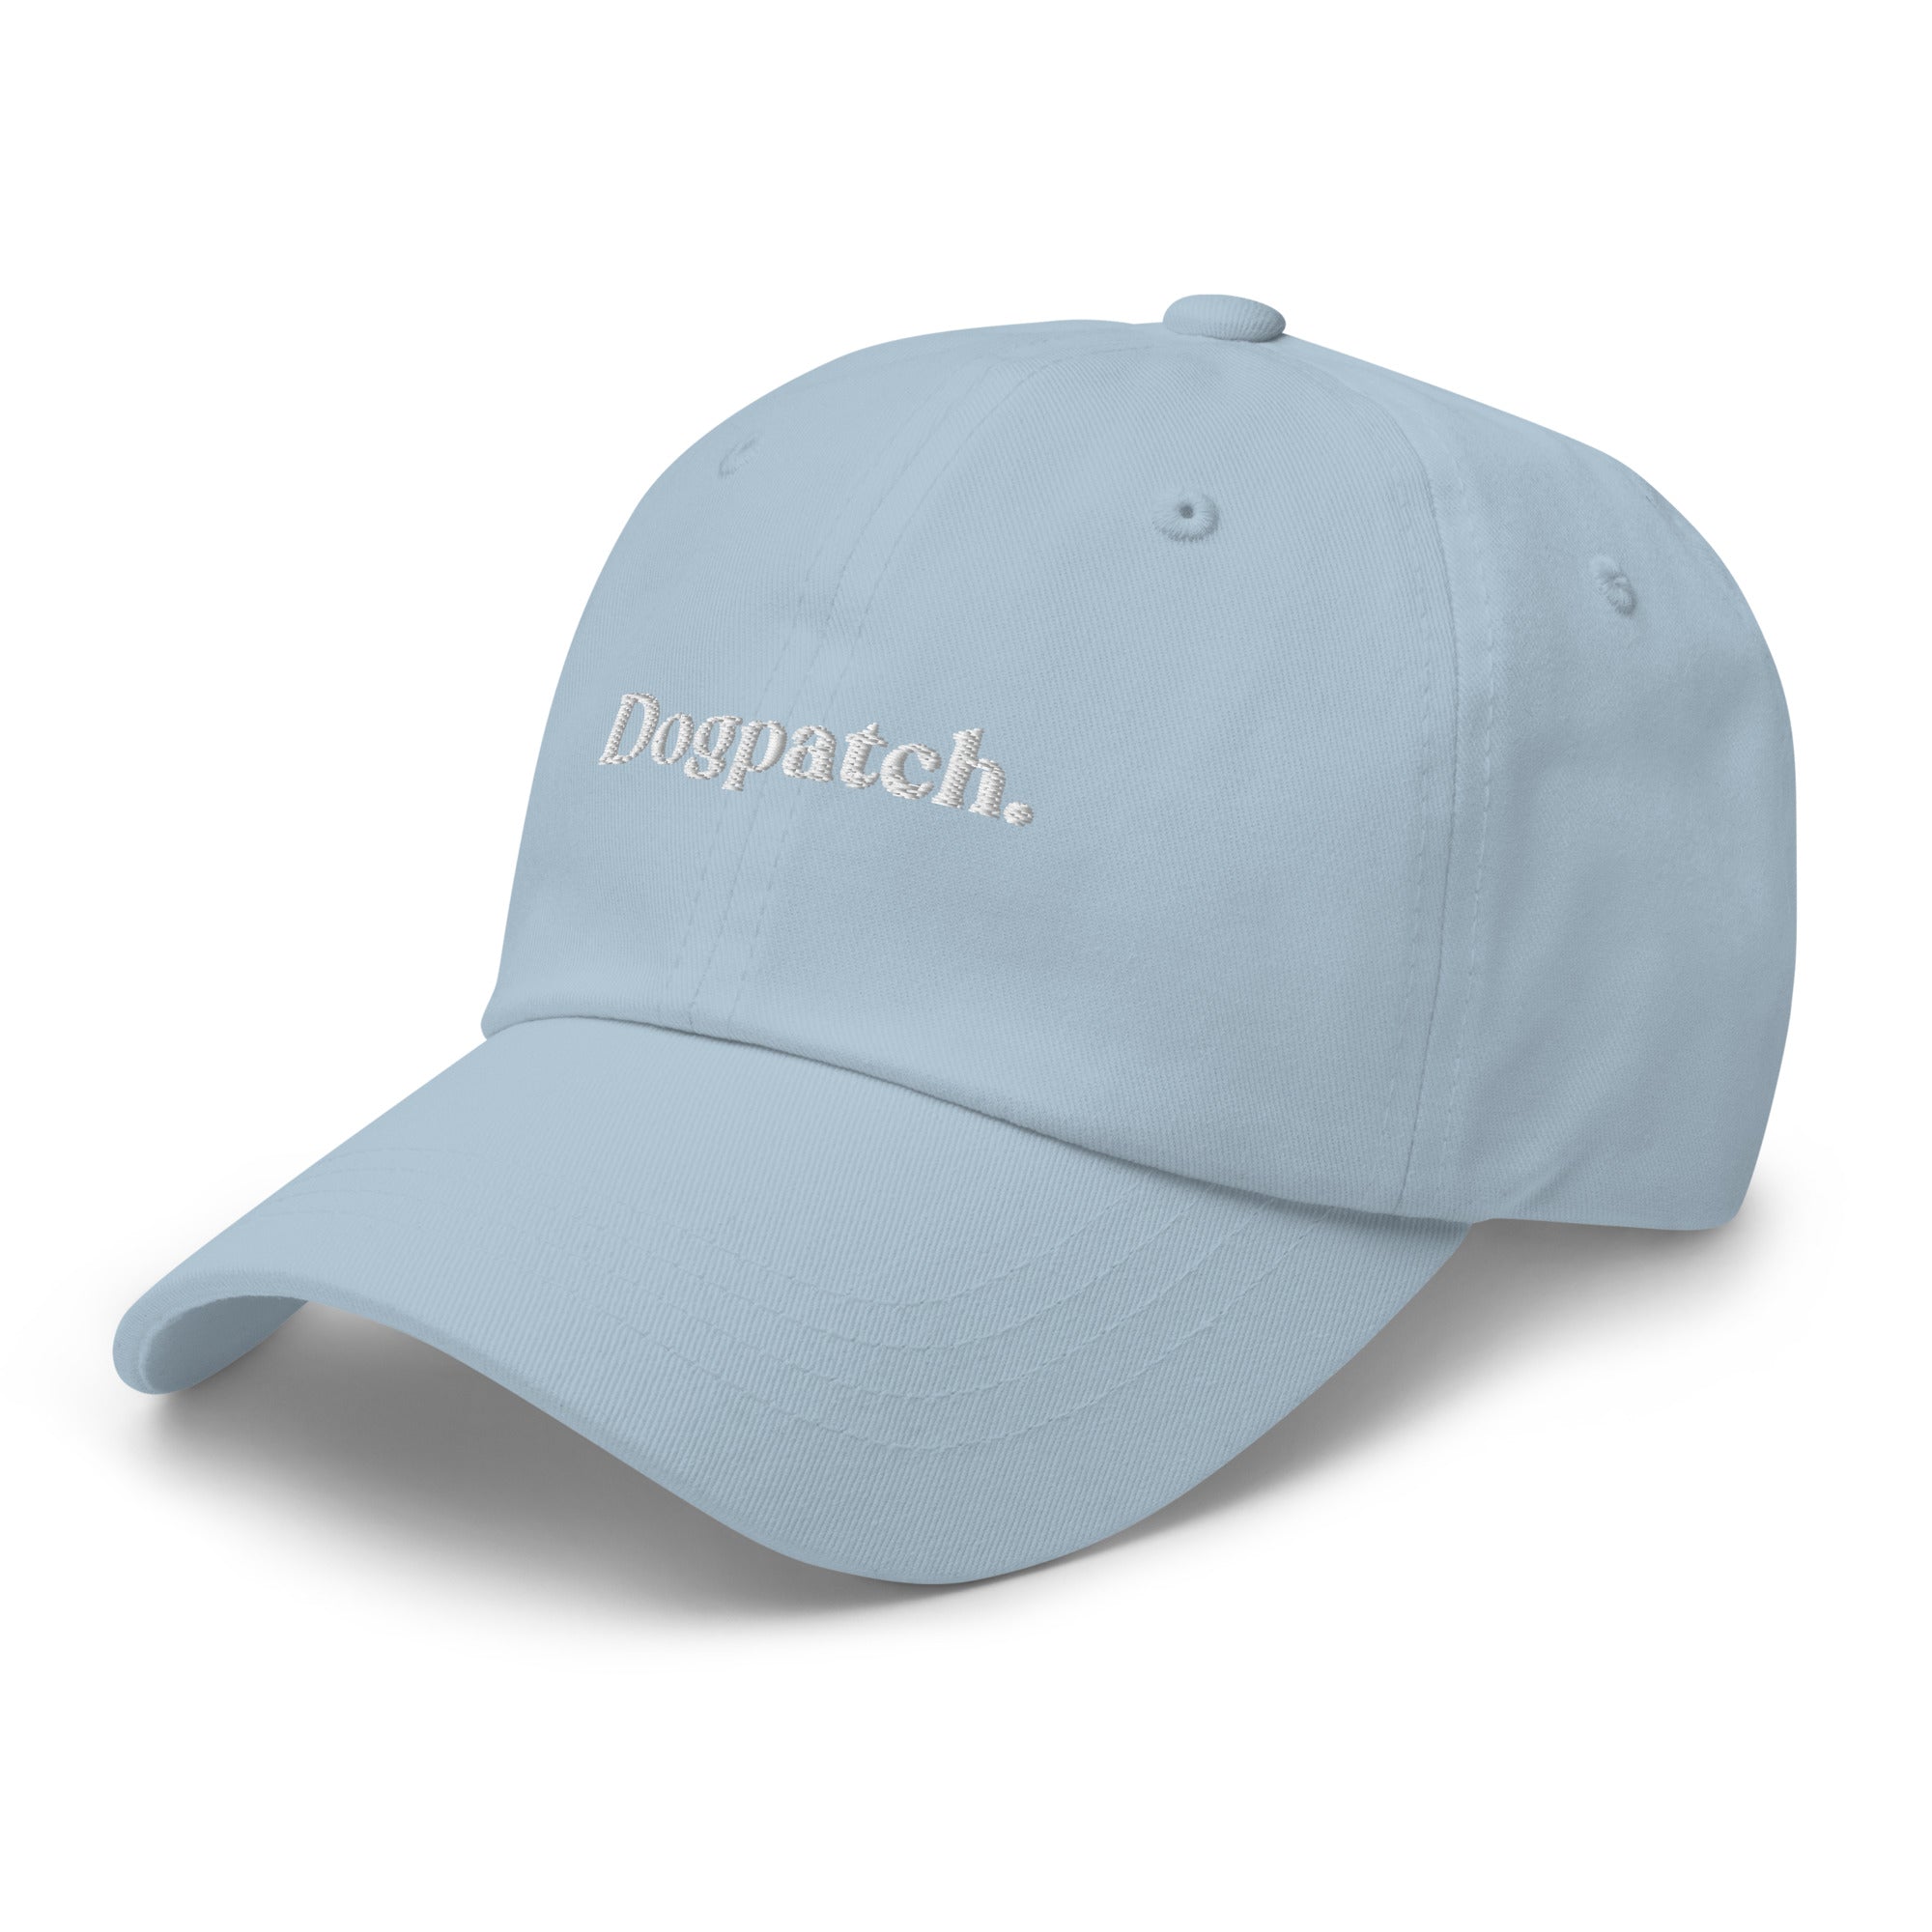 Classic Dad Hat - Dogpatch | San Francisco, CA